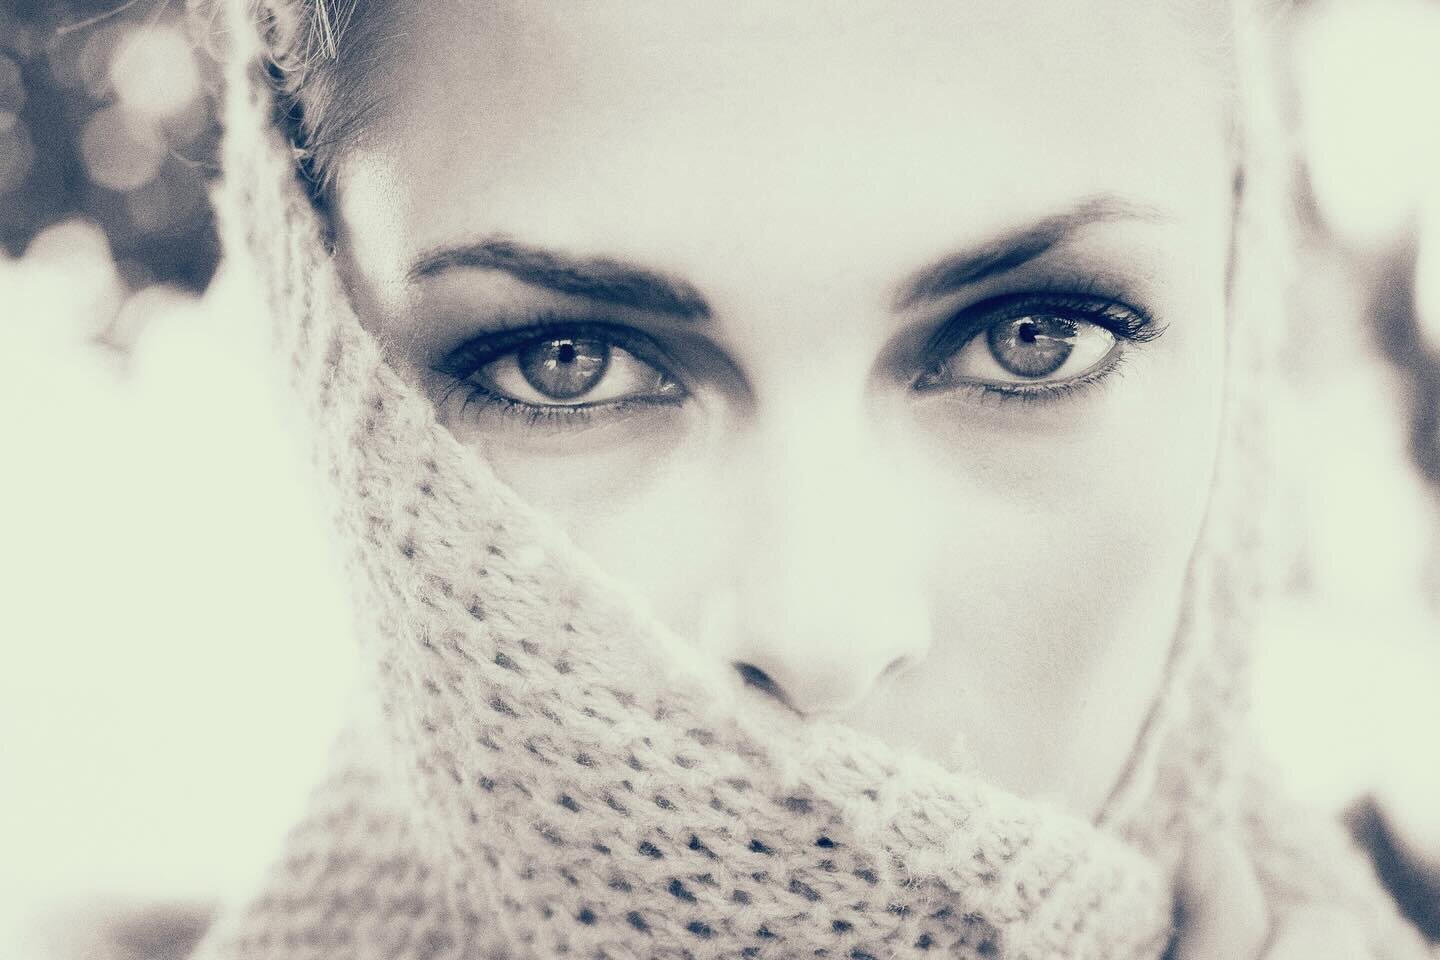 _______________
___________________________
Eyes. Windows of souls.
Projecting worlds within.
Truth glimpsed.

LEAH______________________